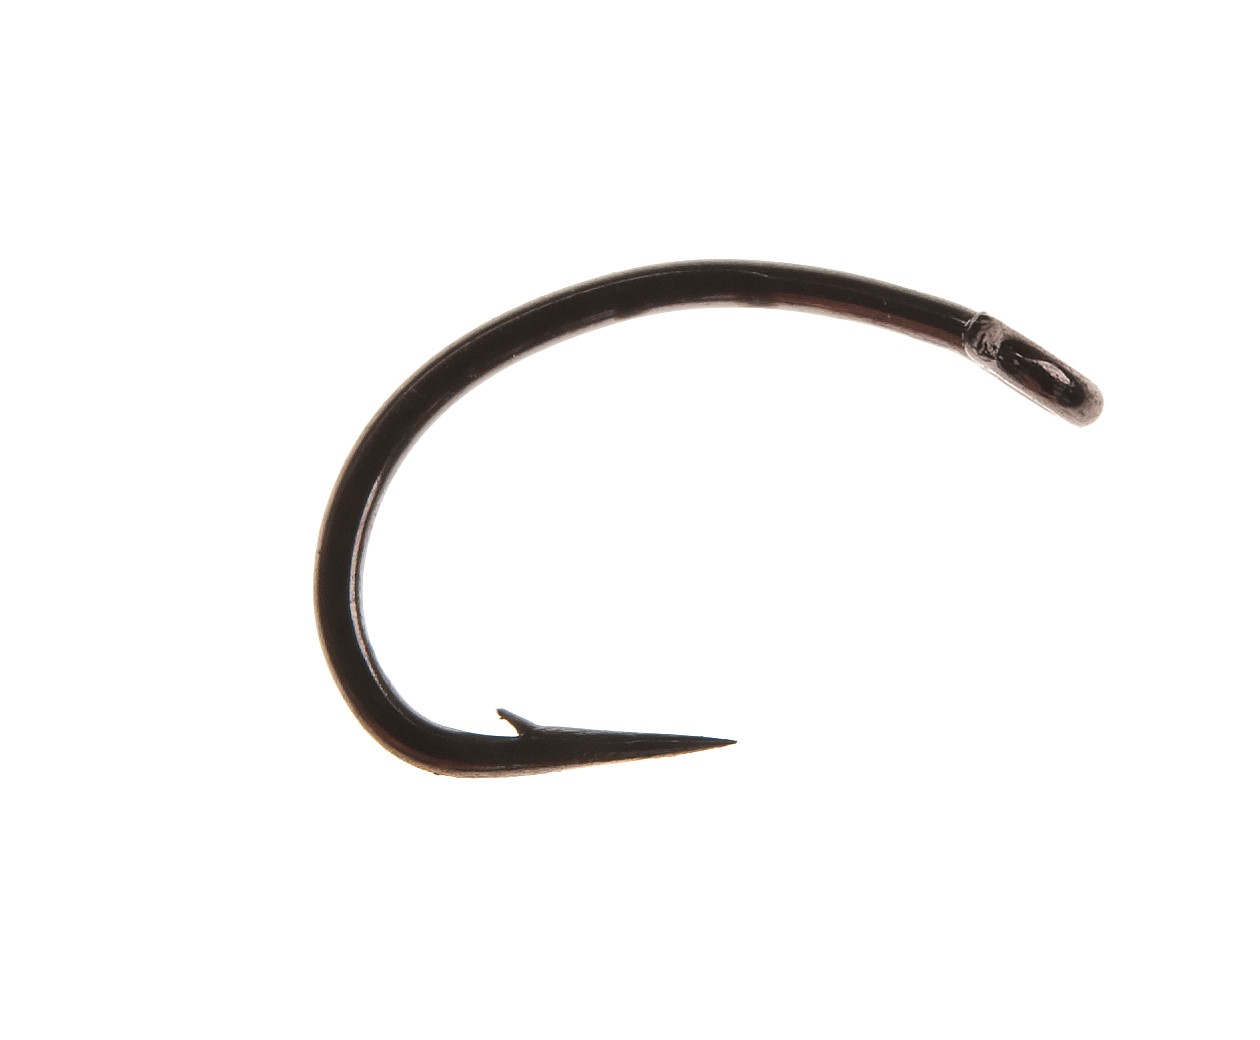 Ahrex Fw524 Super Dry Barbed #10 Trout Fly Tying Hooks